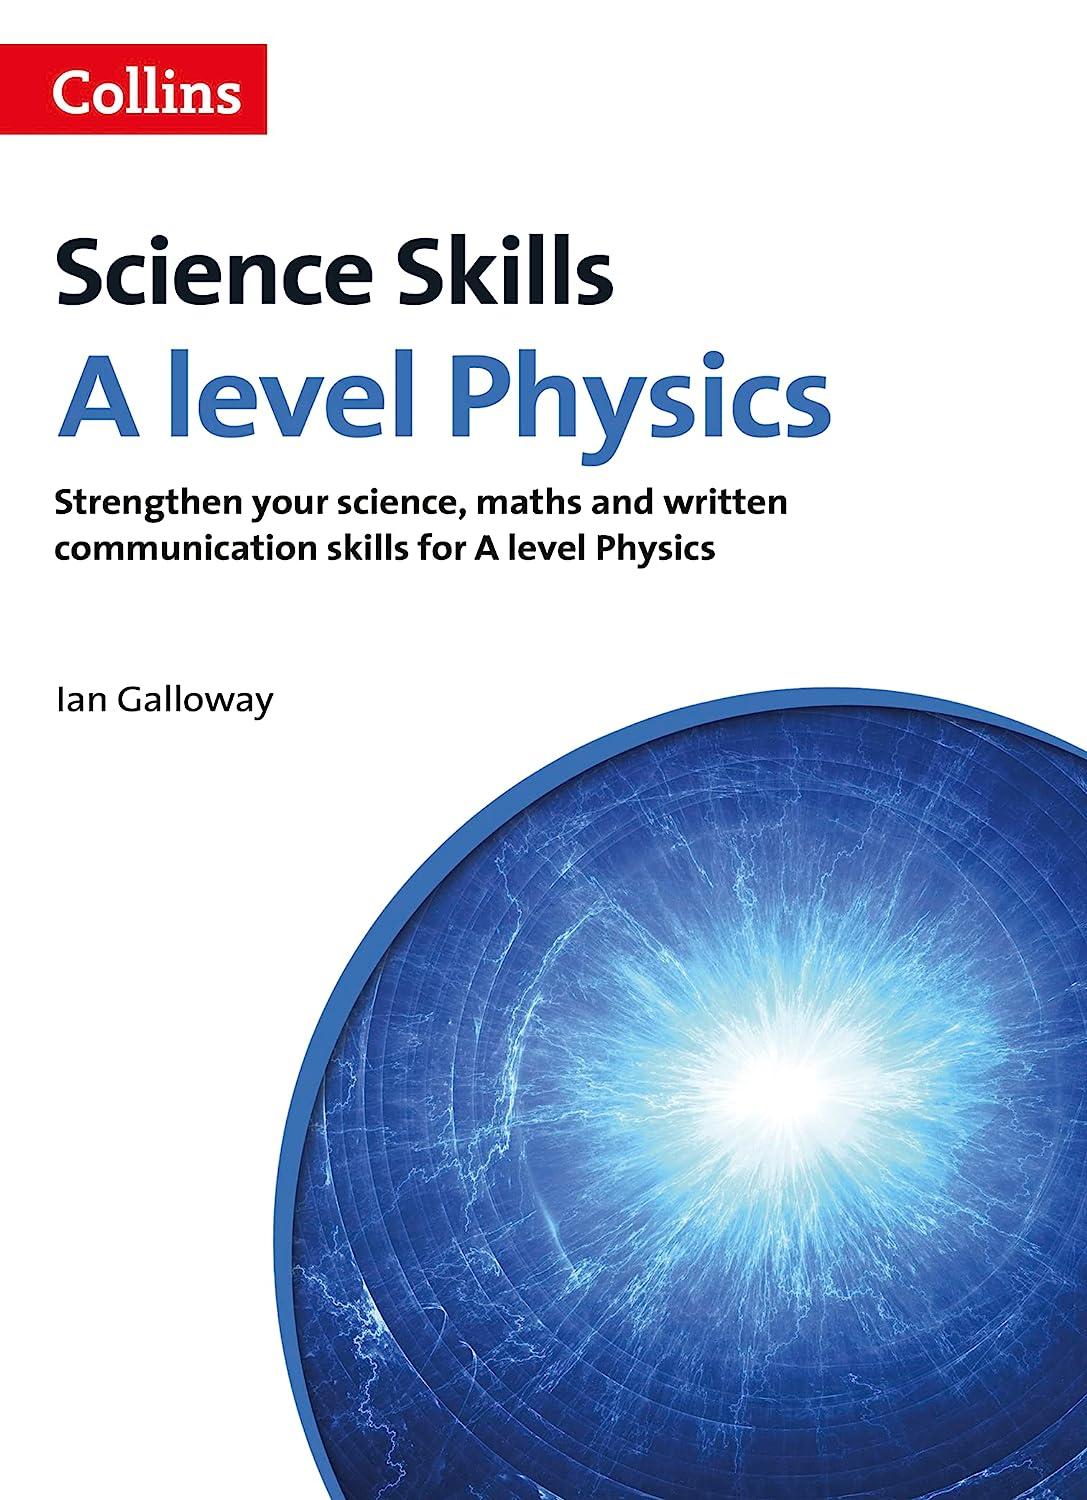 science skills a level physics strengthen your science, maths and written communication skills for a level